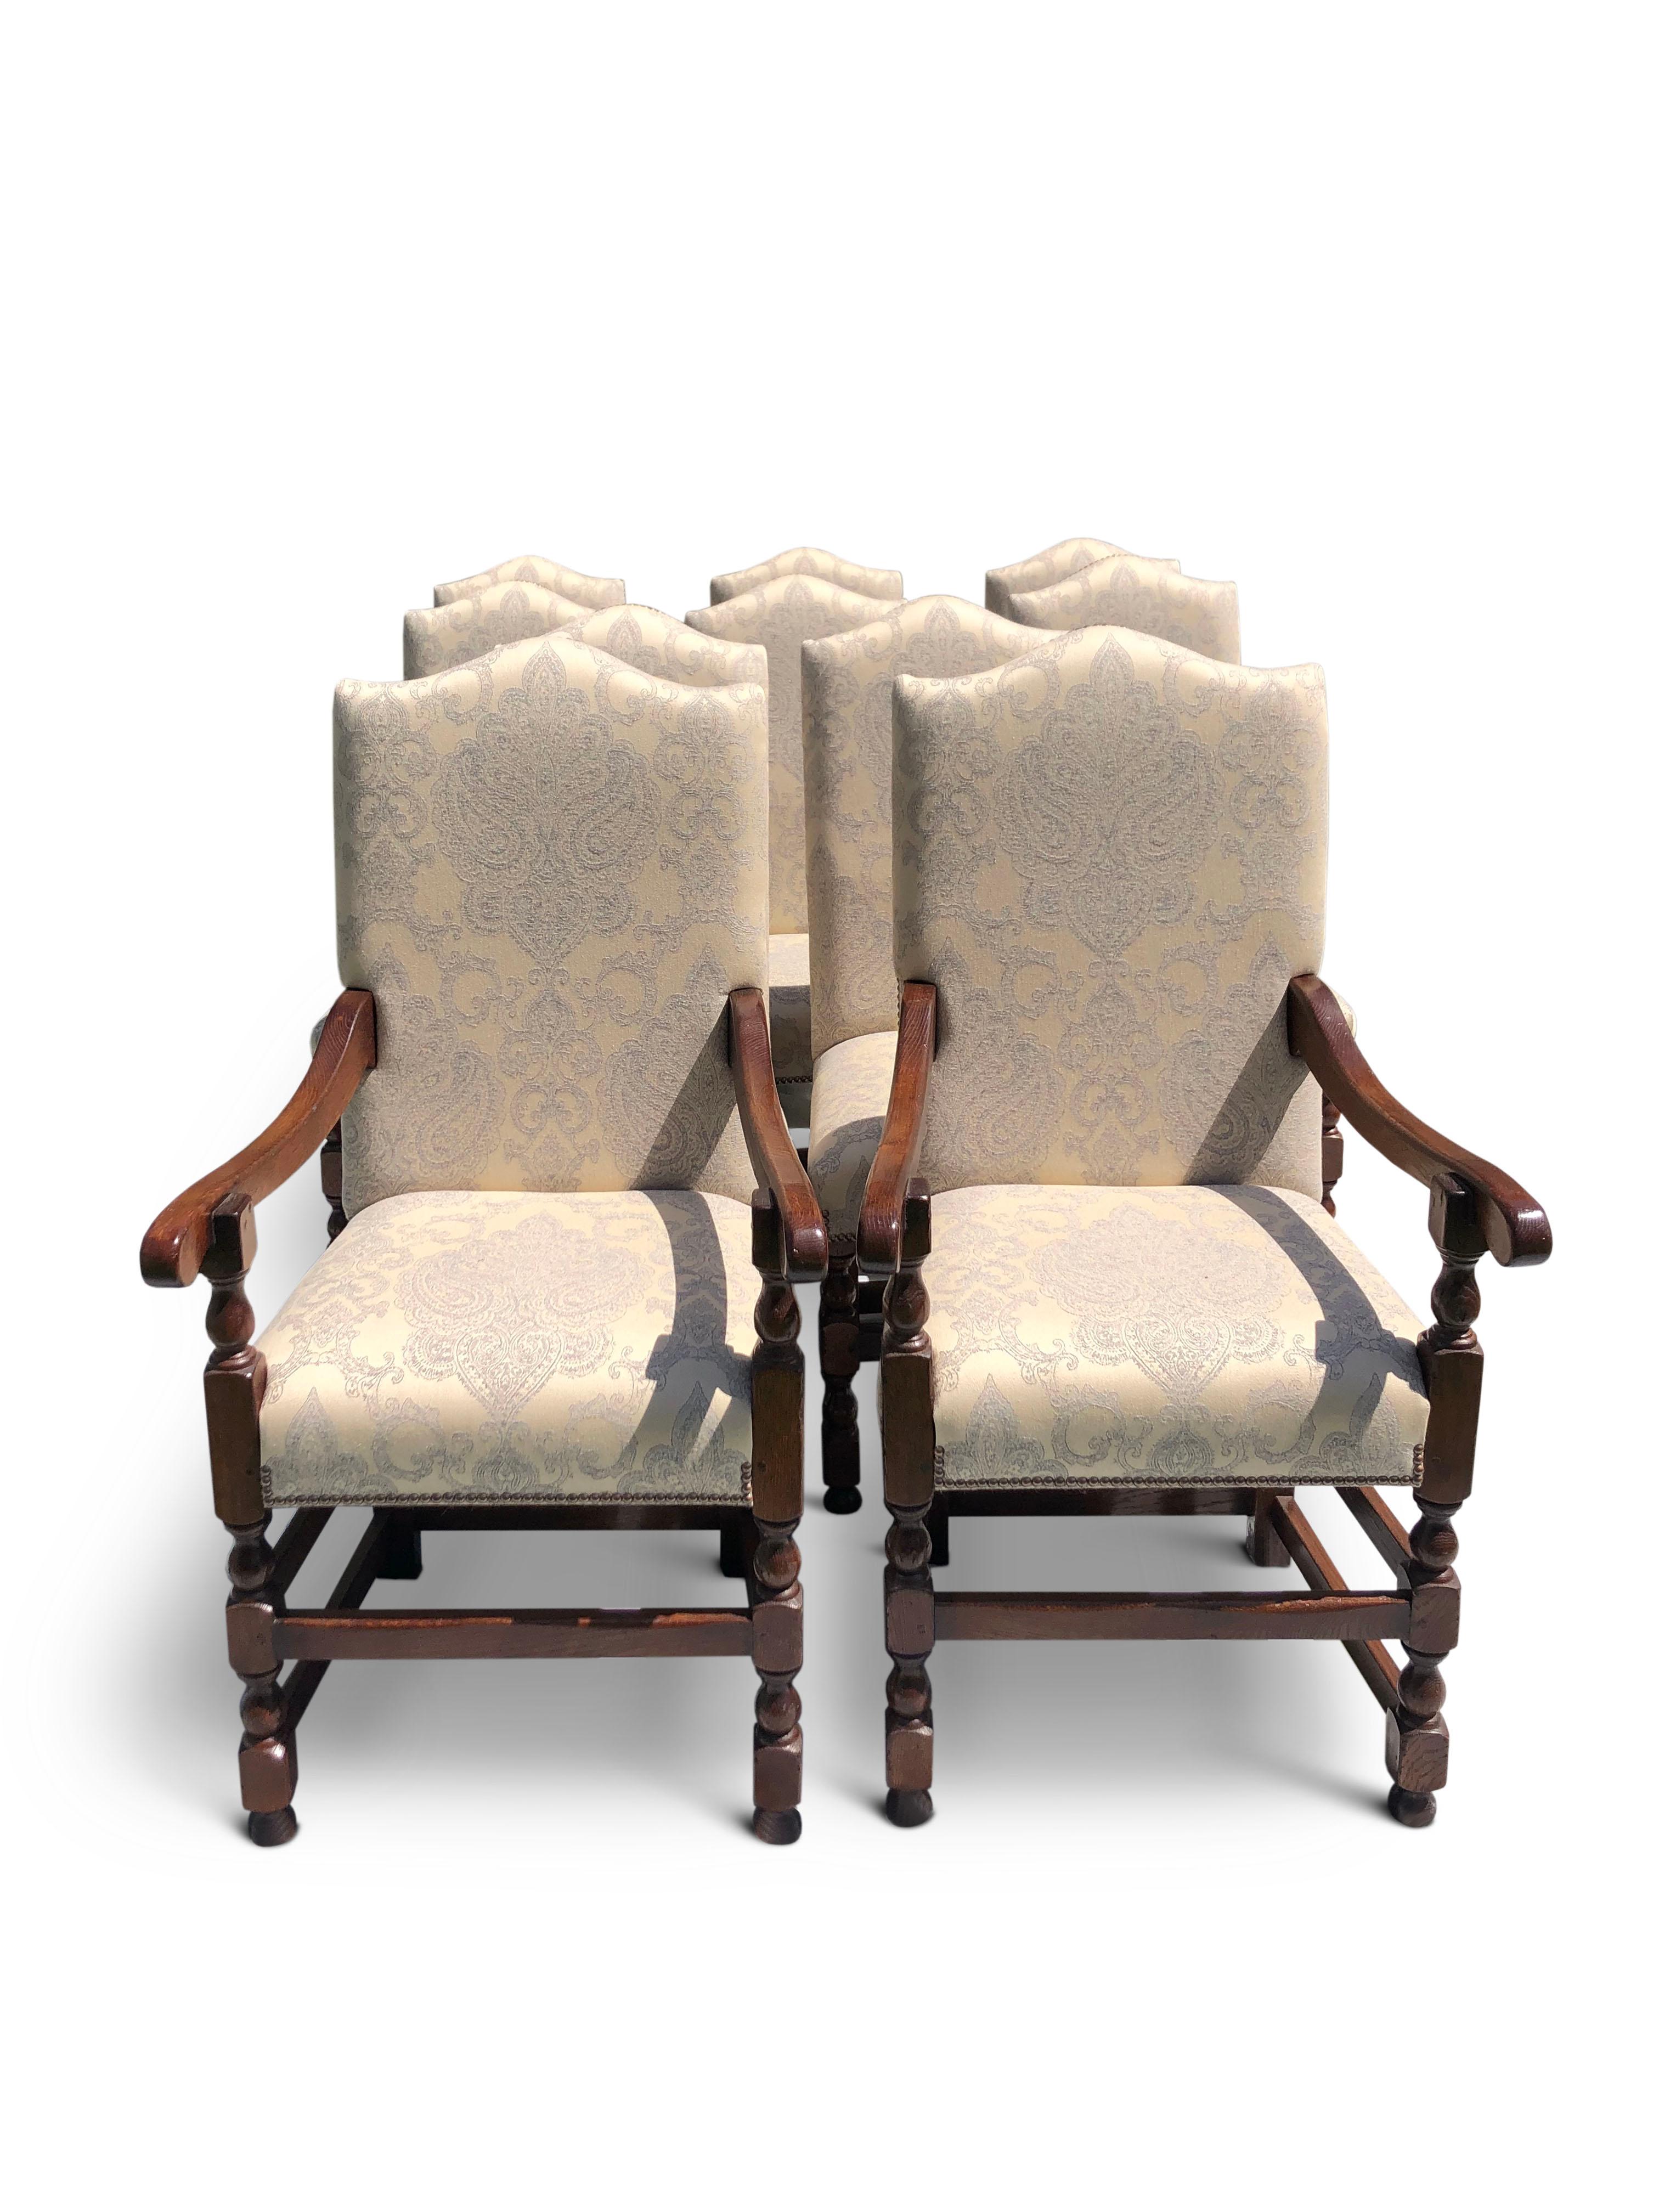 A set of 10 oak dining chairs manufactured by Garners.
Two carvers and eight chairs camel backs, turned baluster legs with stretchers upholstered in beautiful neutral stone, duck egg blue damask fabric.
  